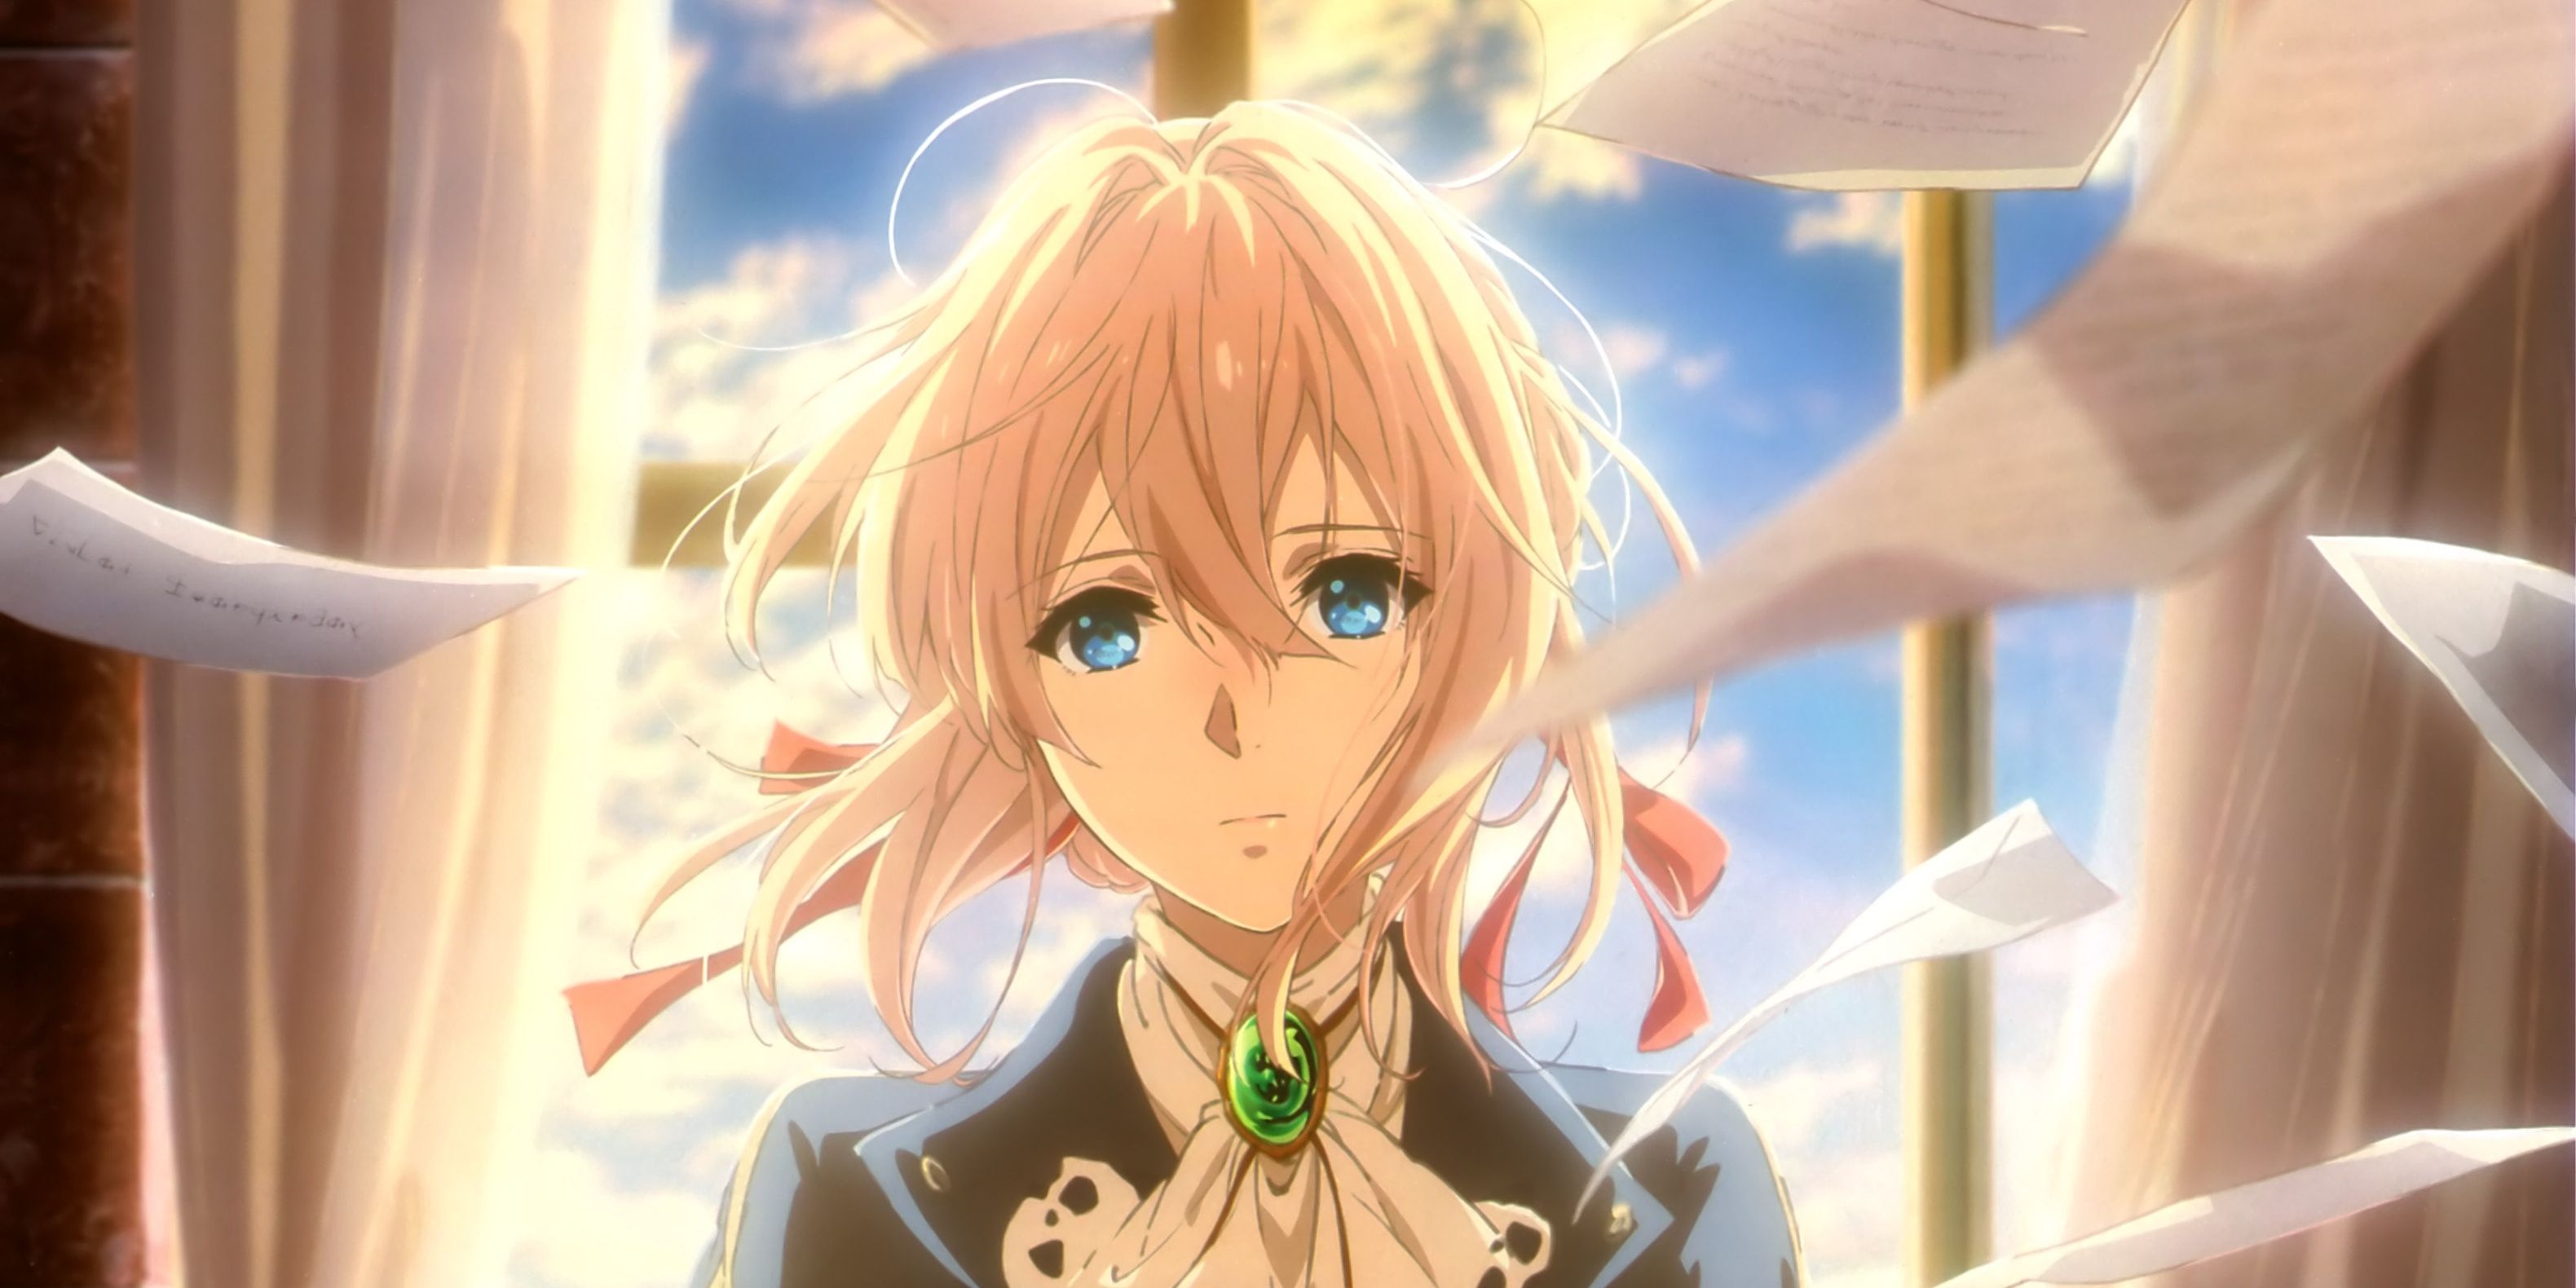 Violet Evergarden – I Watched an Anime